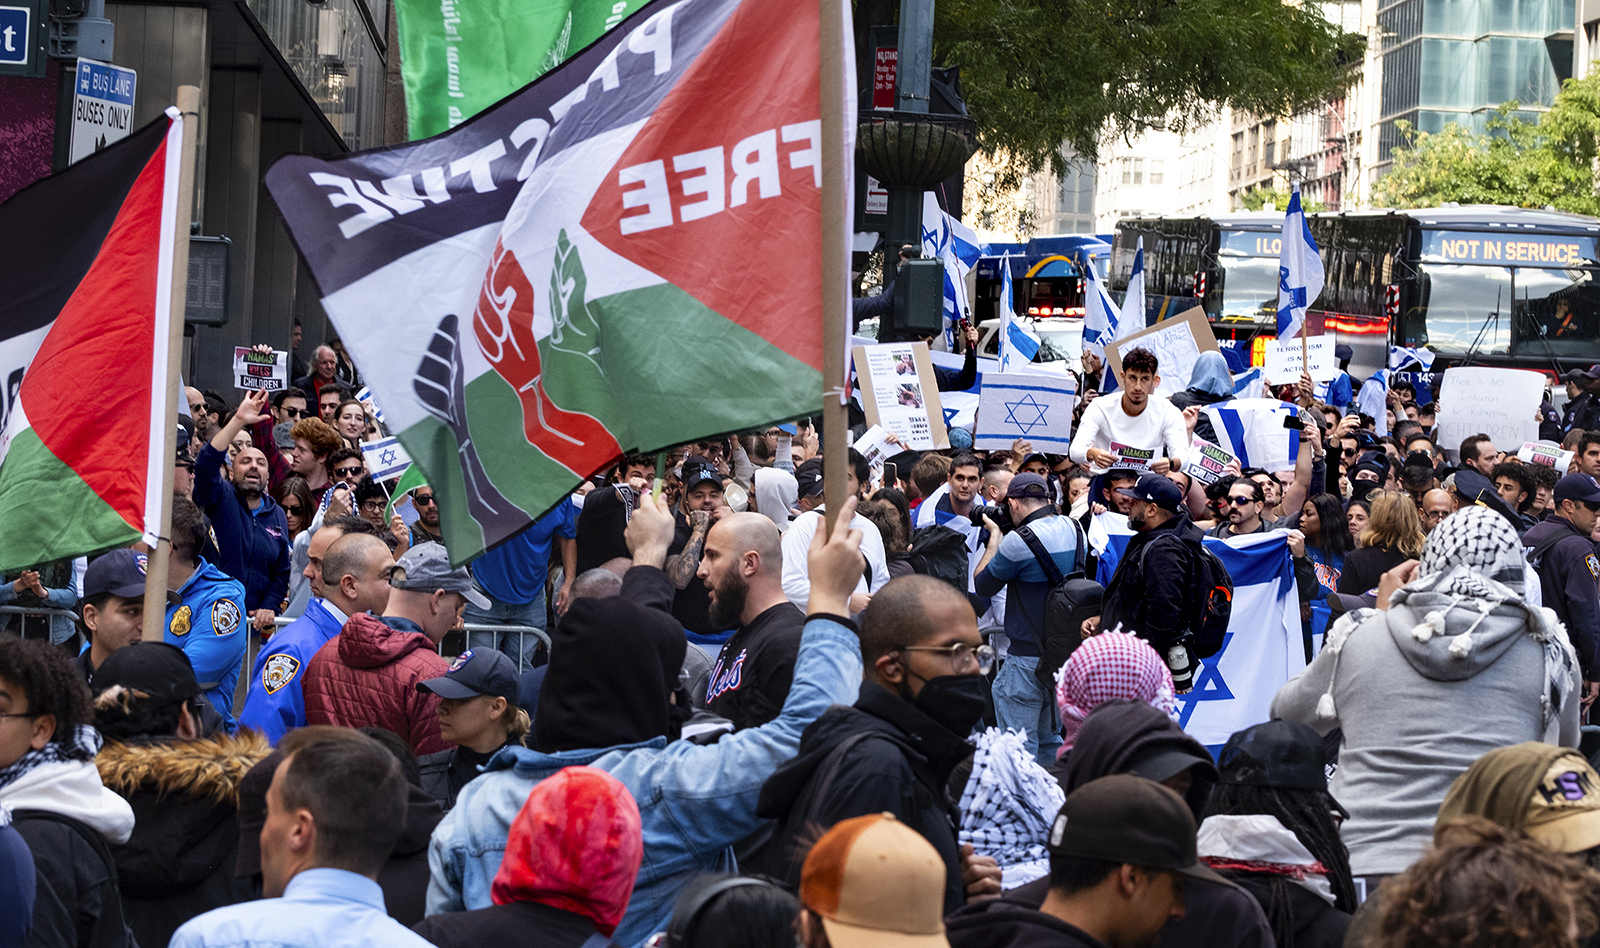 Supporters of Israel, background, and Palestinian supporters, foreground, gather at the Israeli Consulate in New York, Monday, Oct. 9, 2023, in the wake of an attack on Israel by Hamas. (AP Photo/Craig Ruttle)